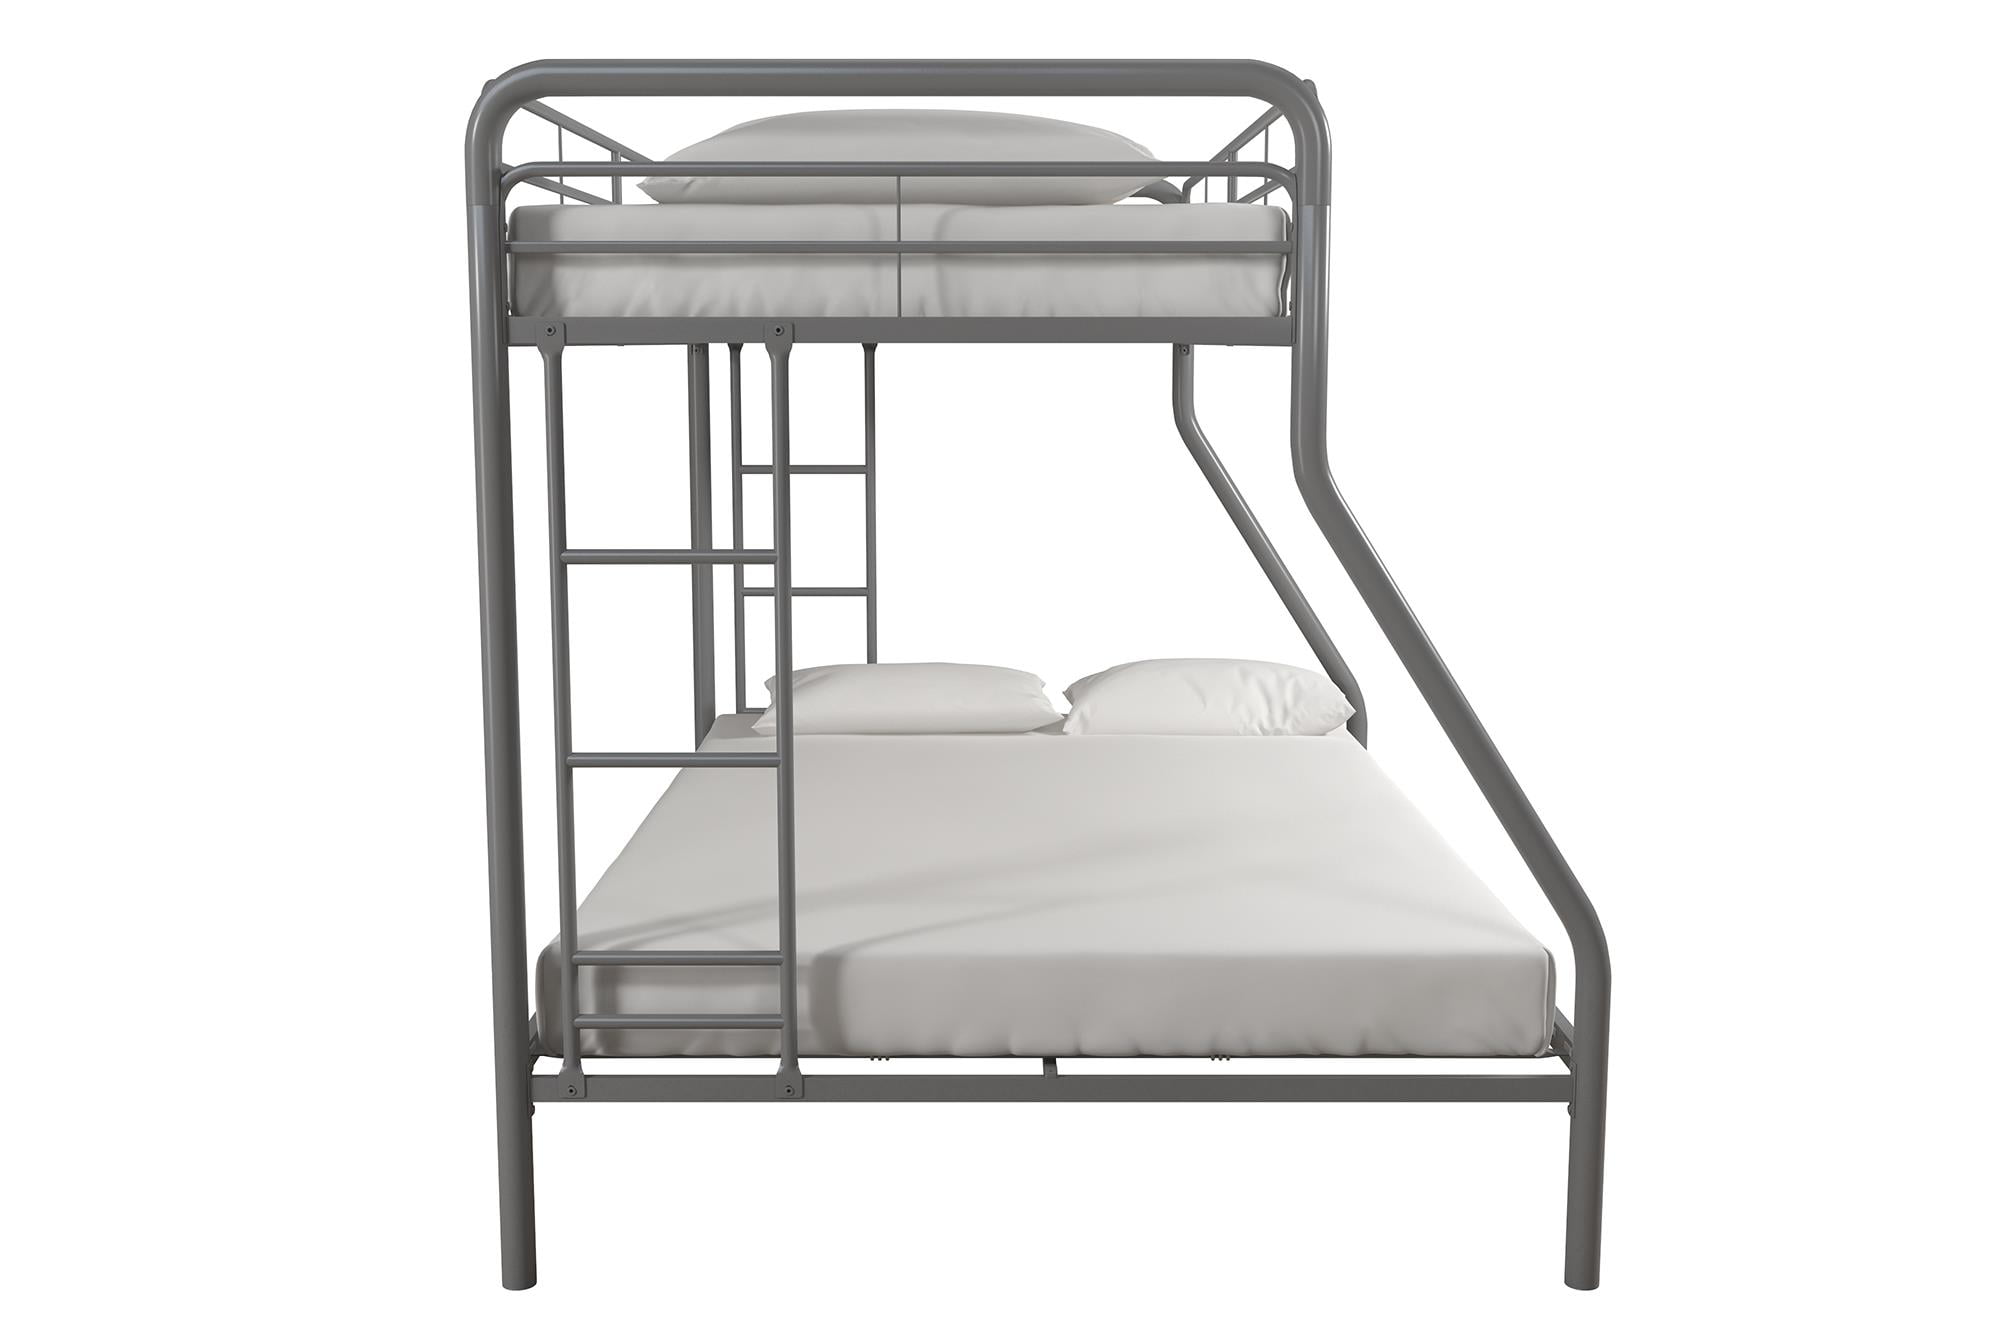 Dhp Twin Over Full Metal Bunk Bed Frame, Dorel Twin Over Full Metal Bunk Bed Instructions